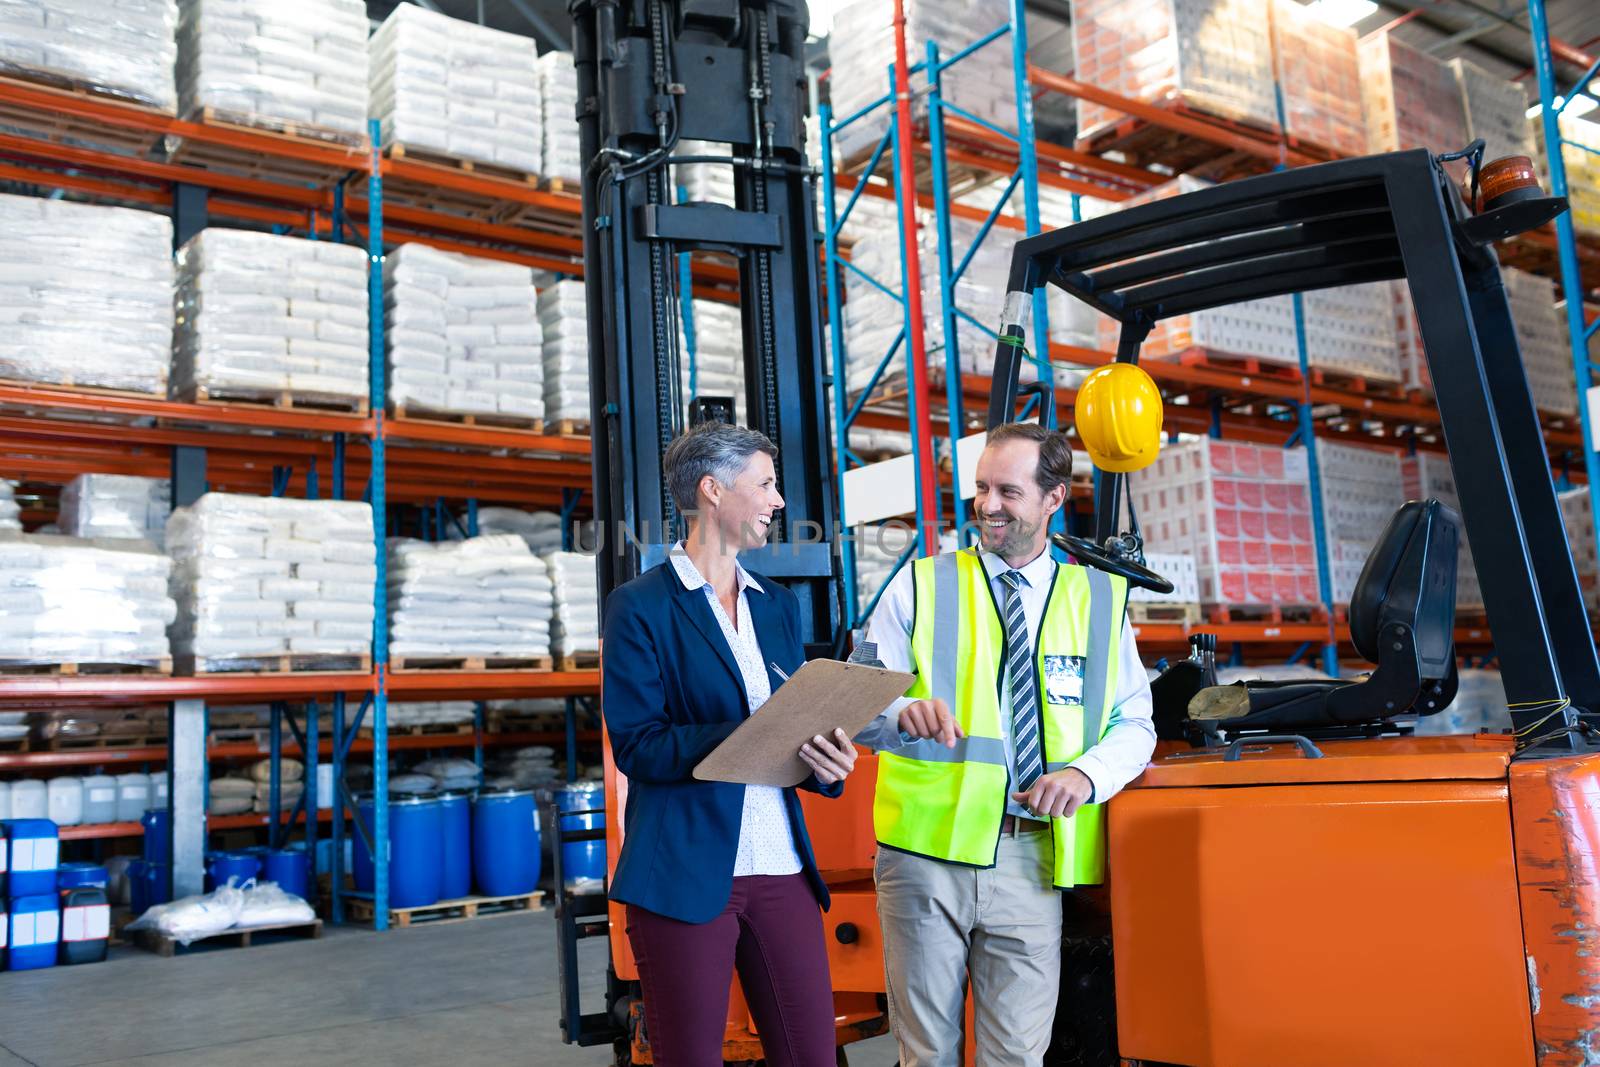 Male and female staff interacting with each other near forklift in warehouse by Wavebreakmedia